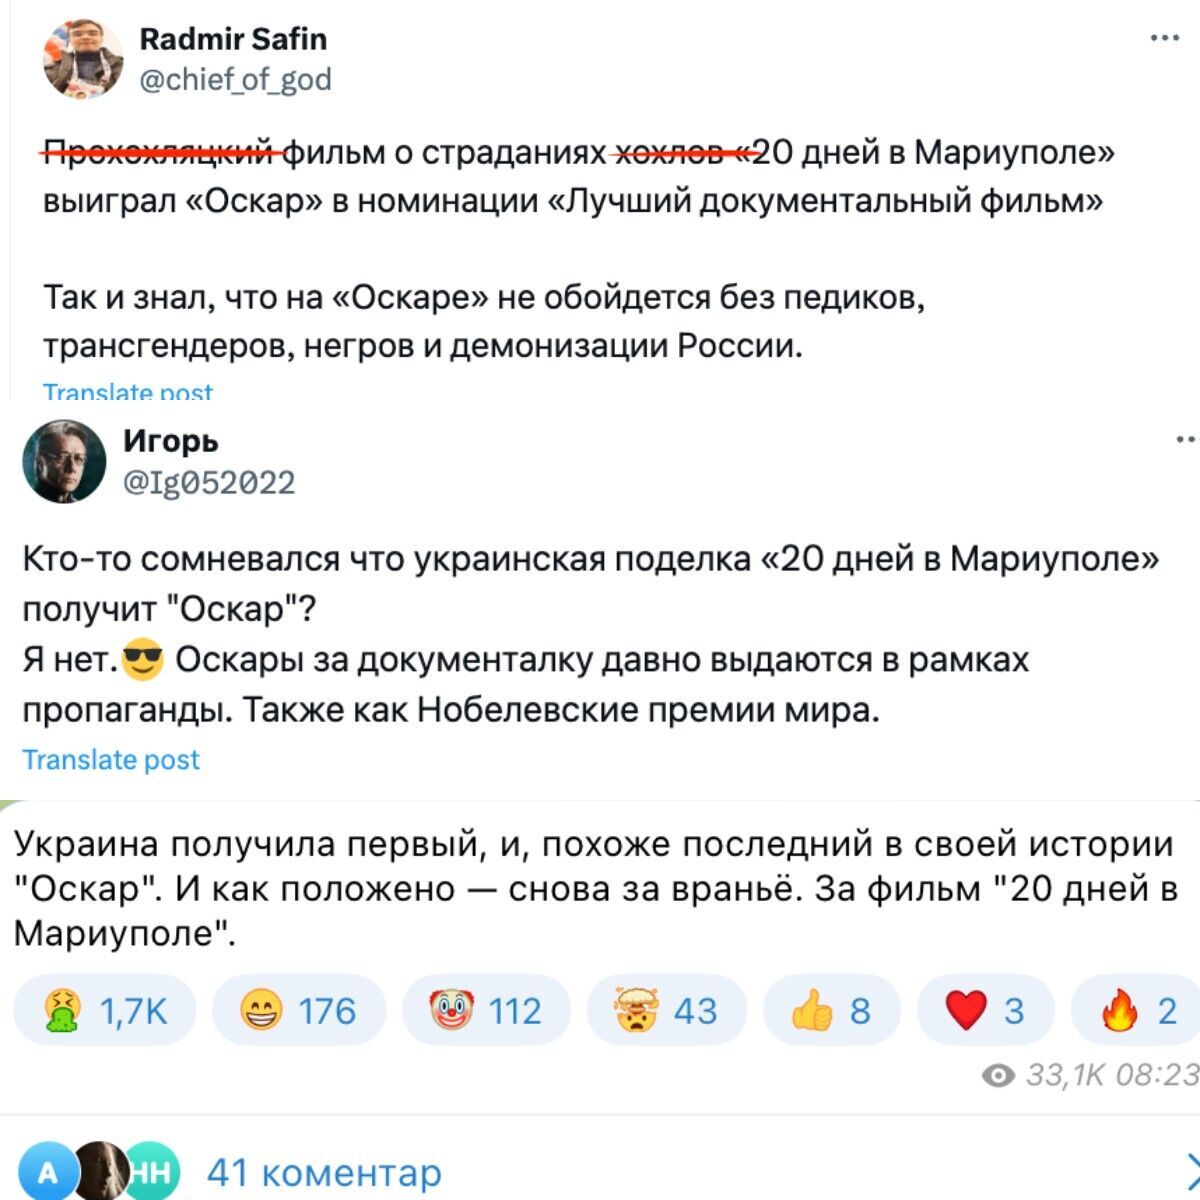 The victory of 20 Days in Mariupol at the 2024 Oscars caused hysteria in Russia: Russians called the tragedy in Ukraine a fake, and the Kremlin ignored it